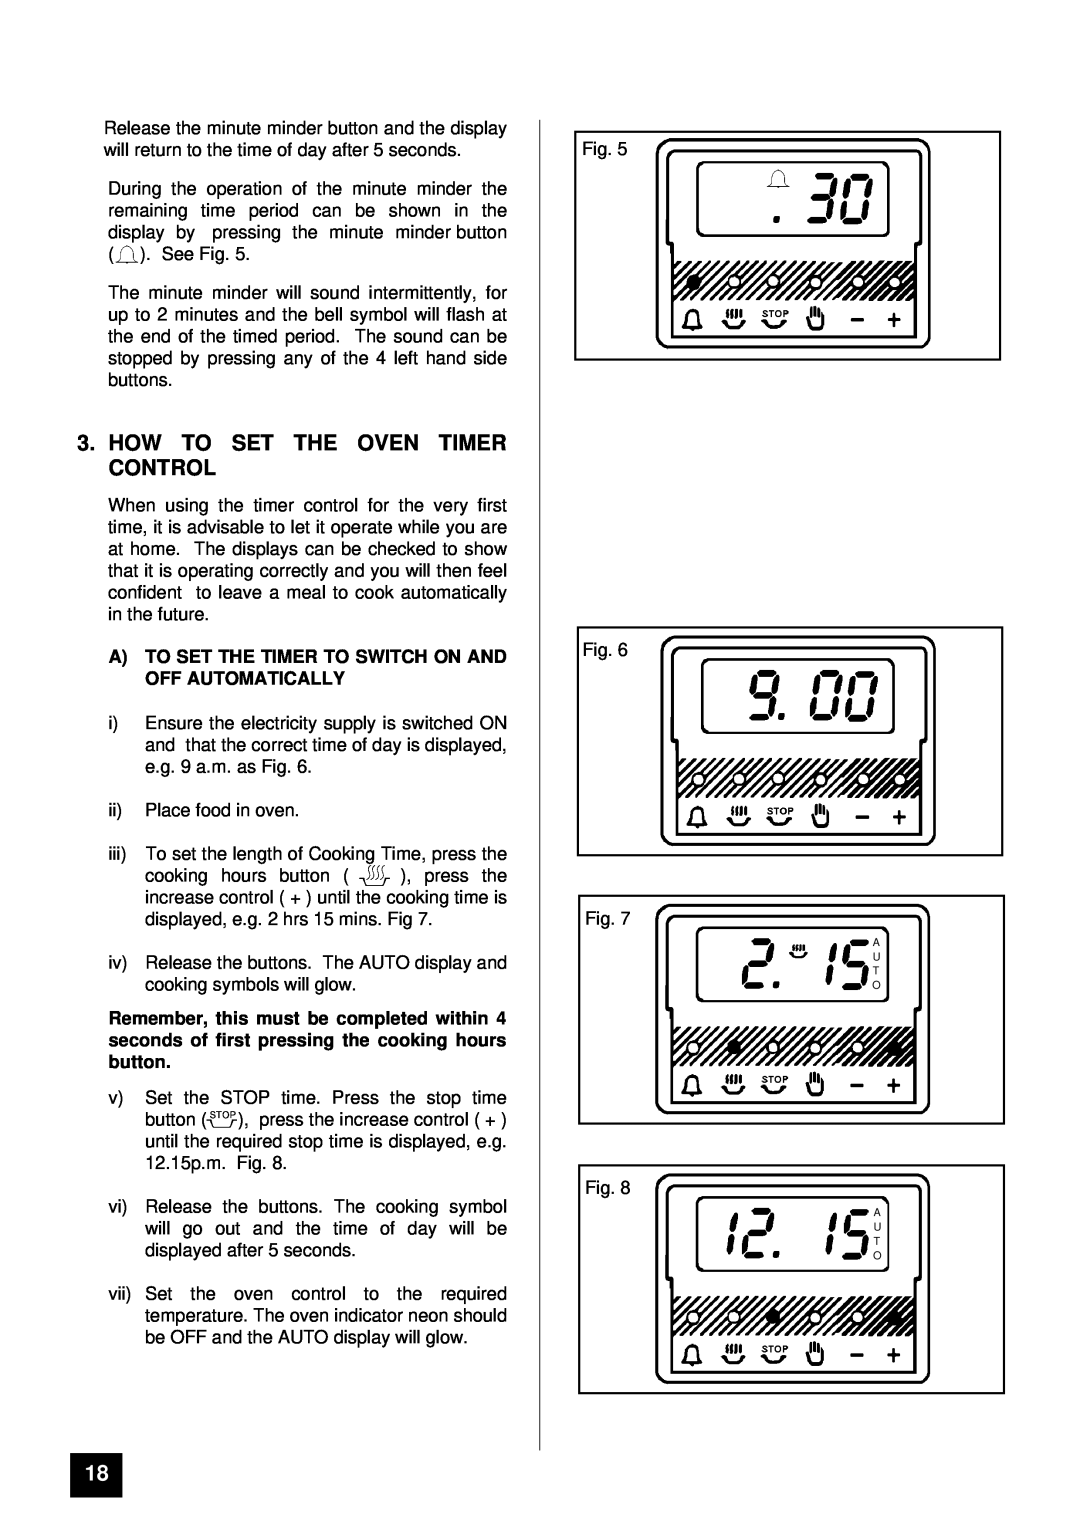 Tricity Bendix BD 913/2 How To Set The Oven Timer Control, A To Set The Timer To Switch On And Off Automatically 